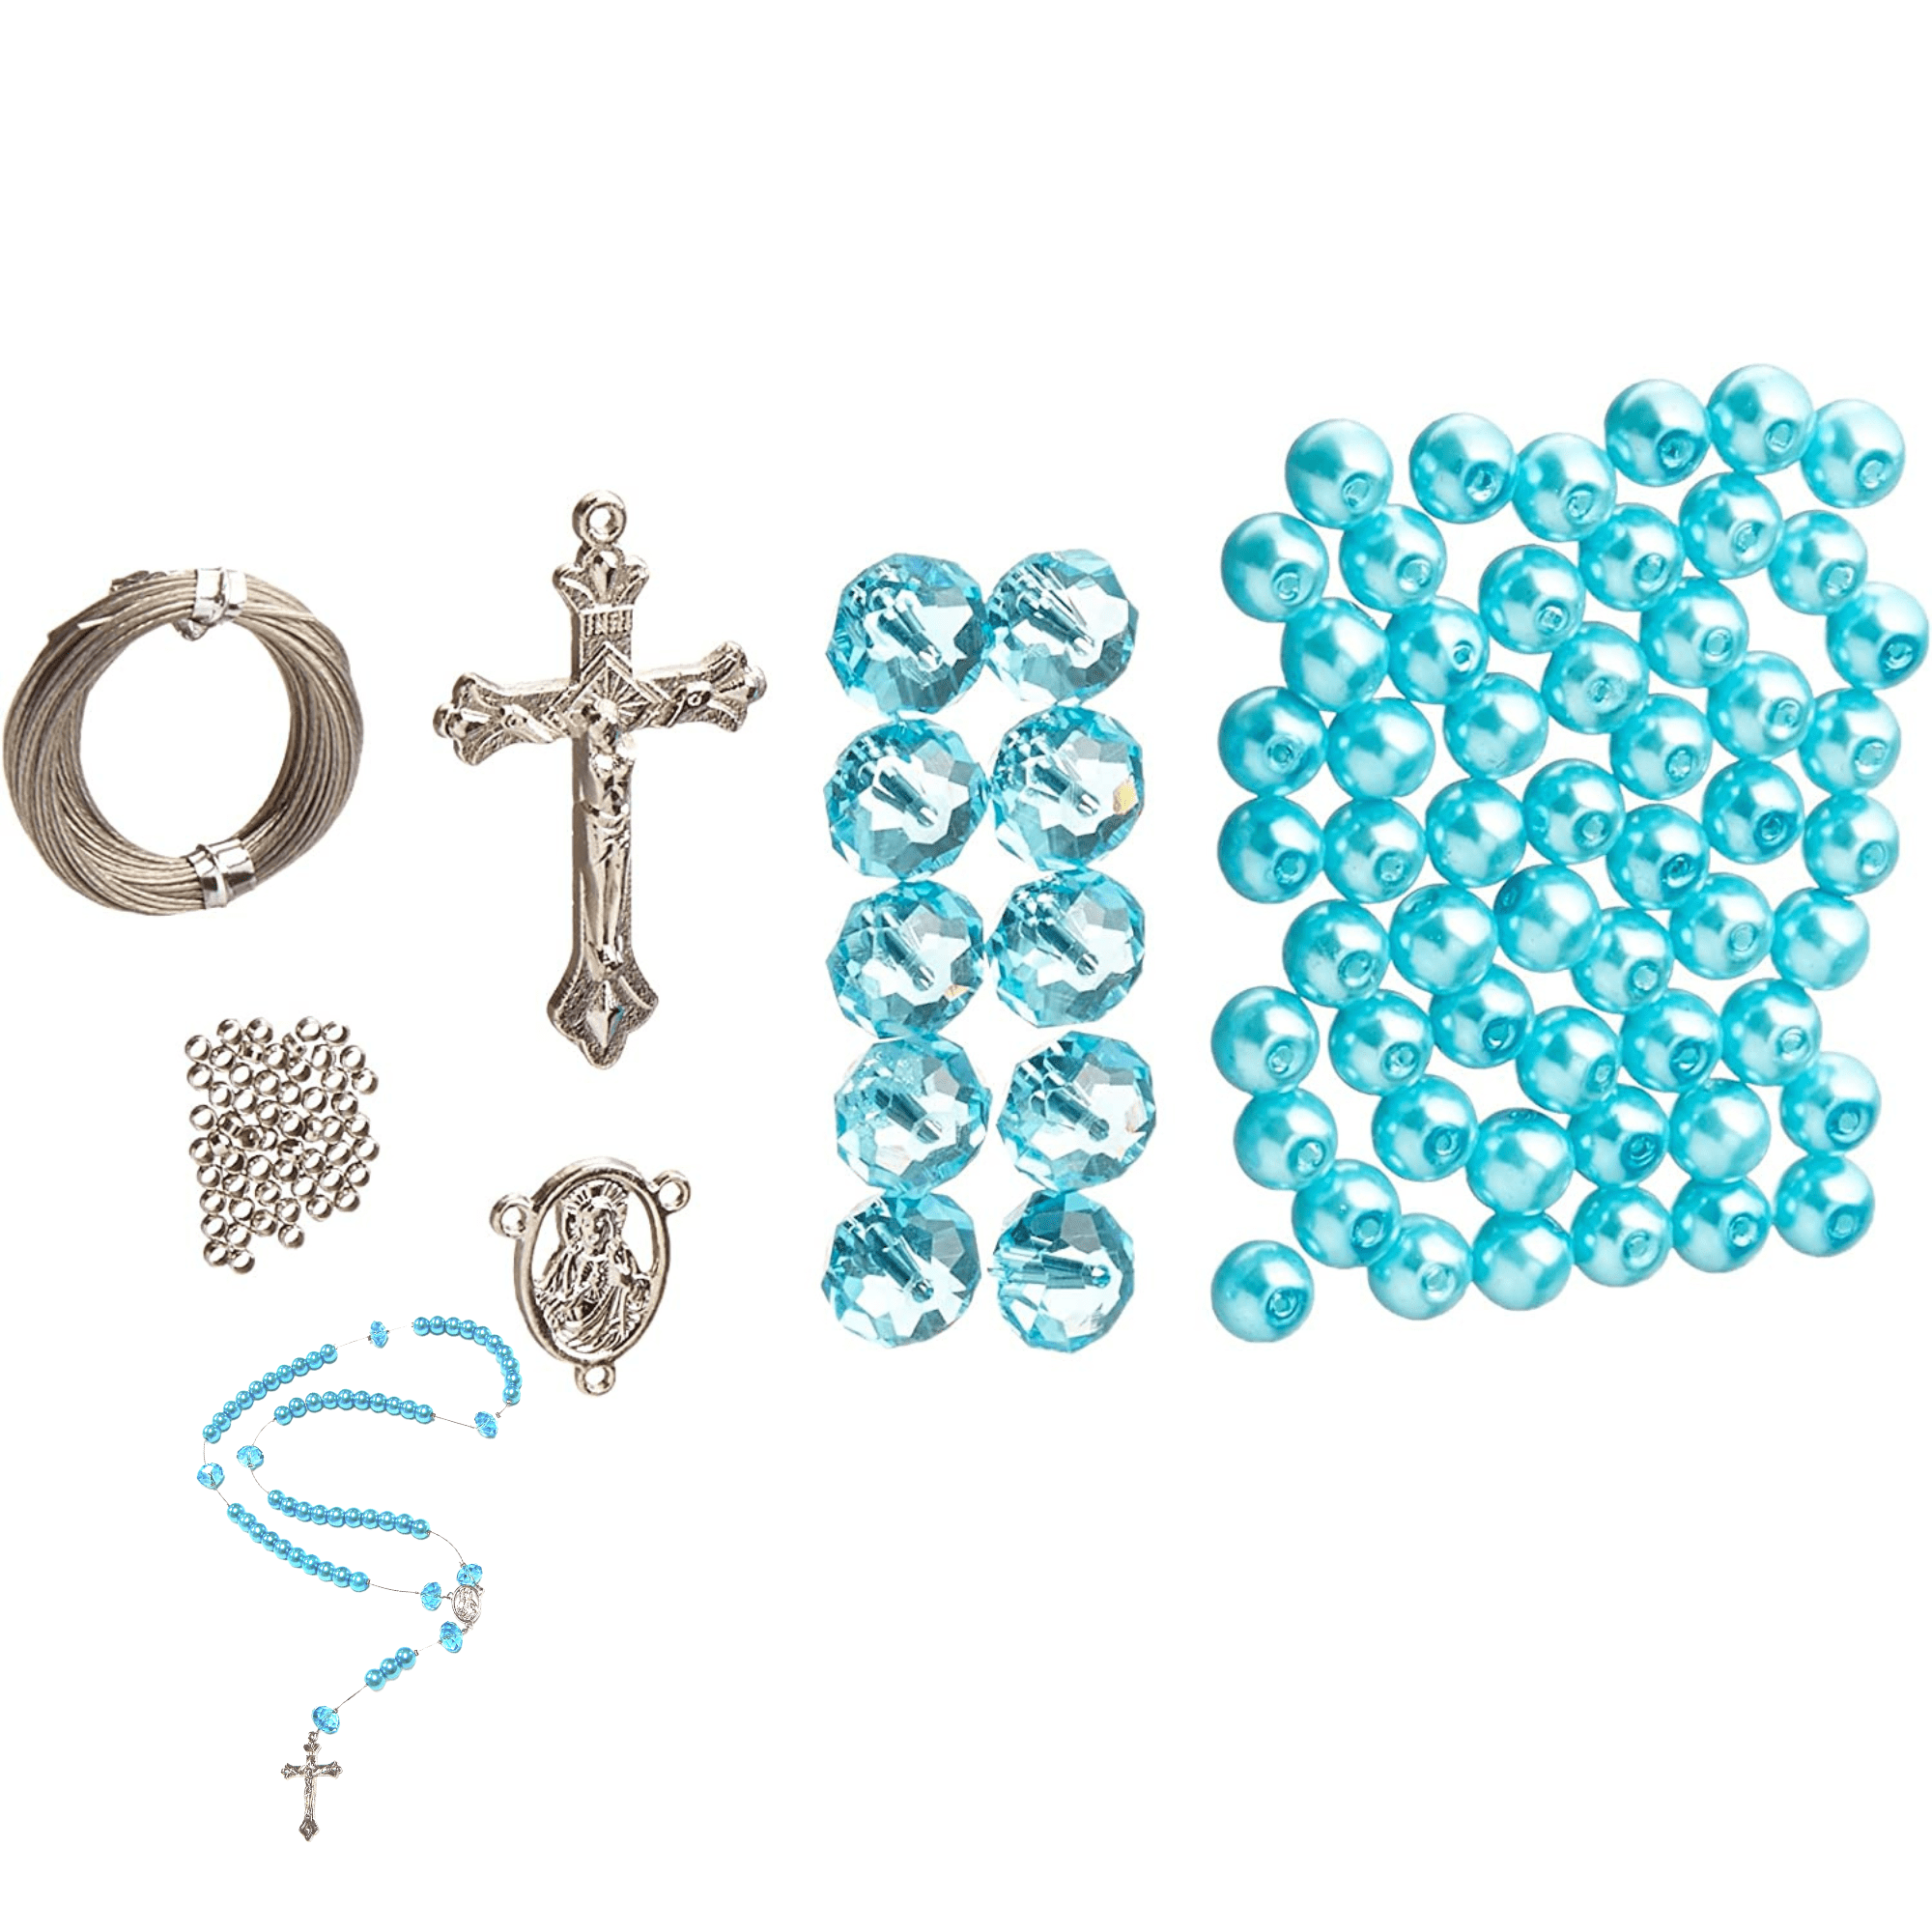 Rosary Kit, Turquoise Blue Catholic Prayer Beading Kit, First Communion  Gift For Kids, Rosary Necklace Making Supplies, 1 pc